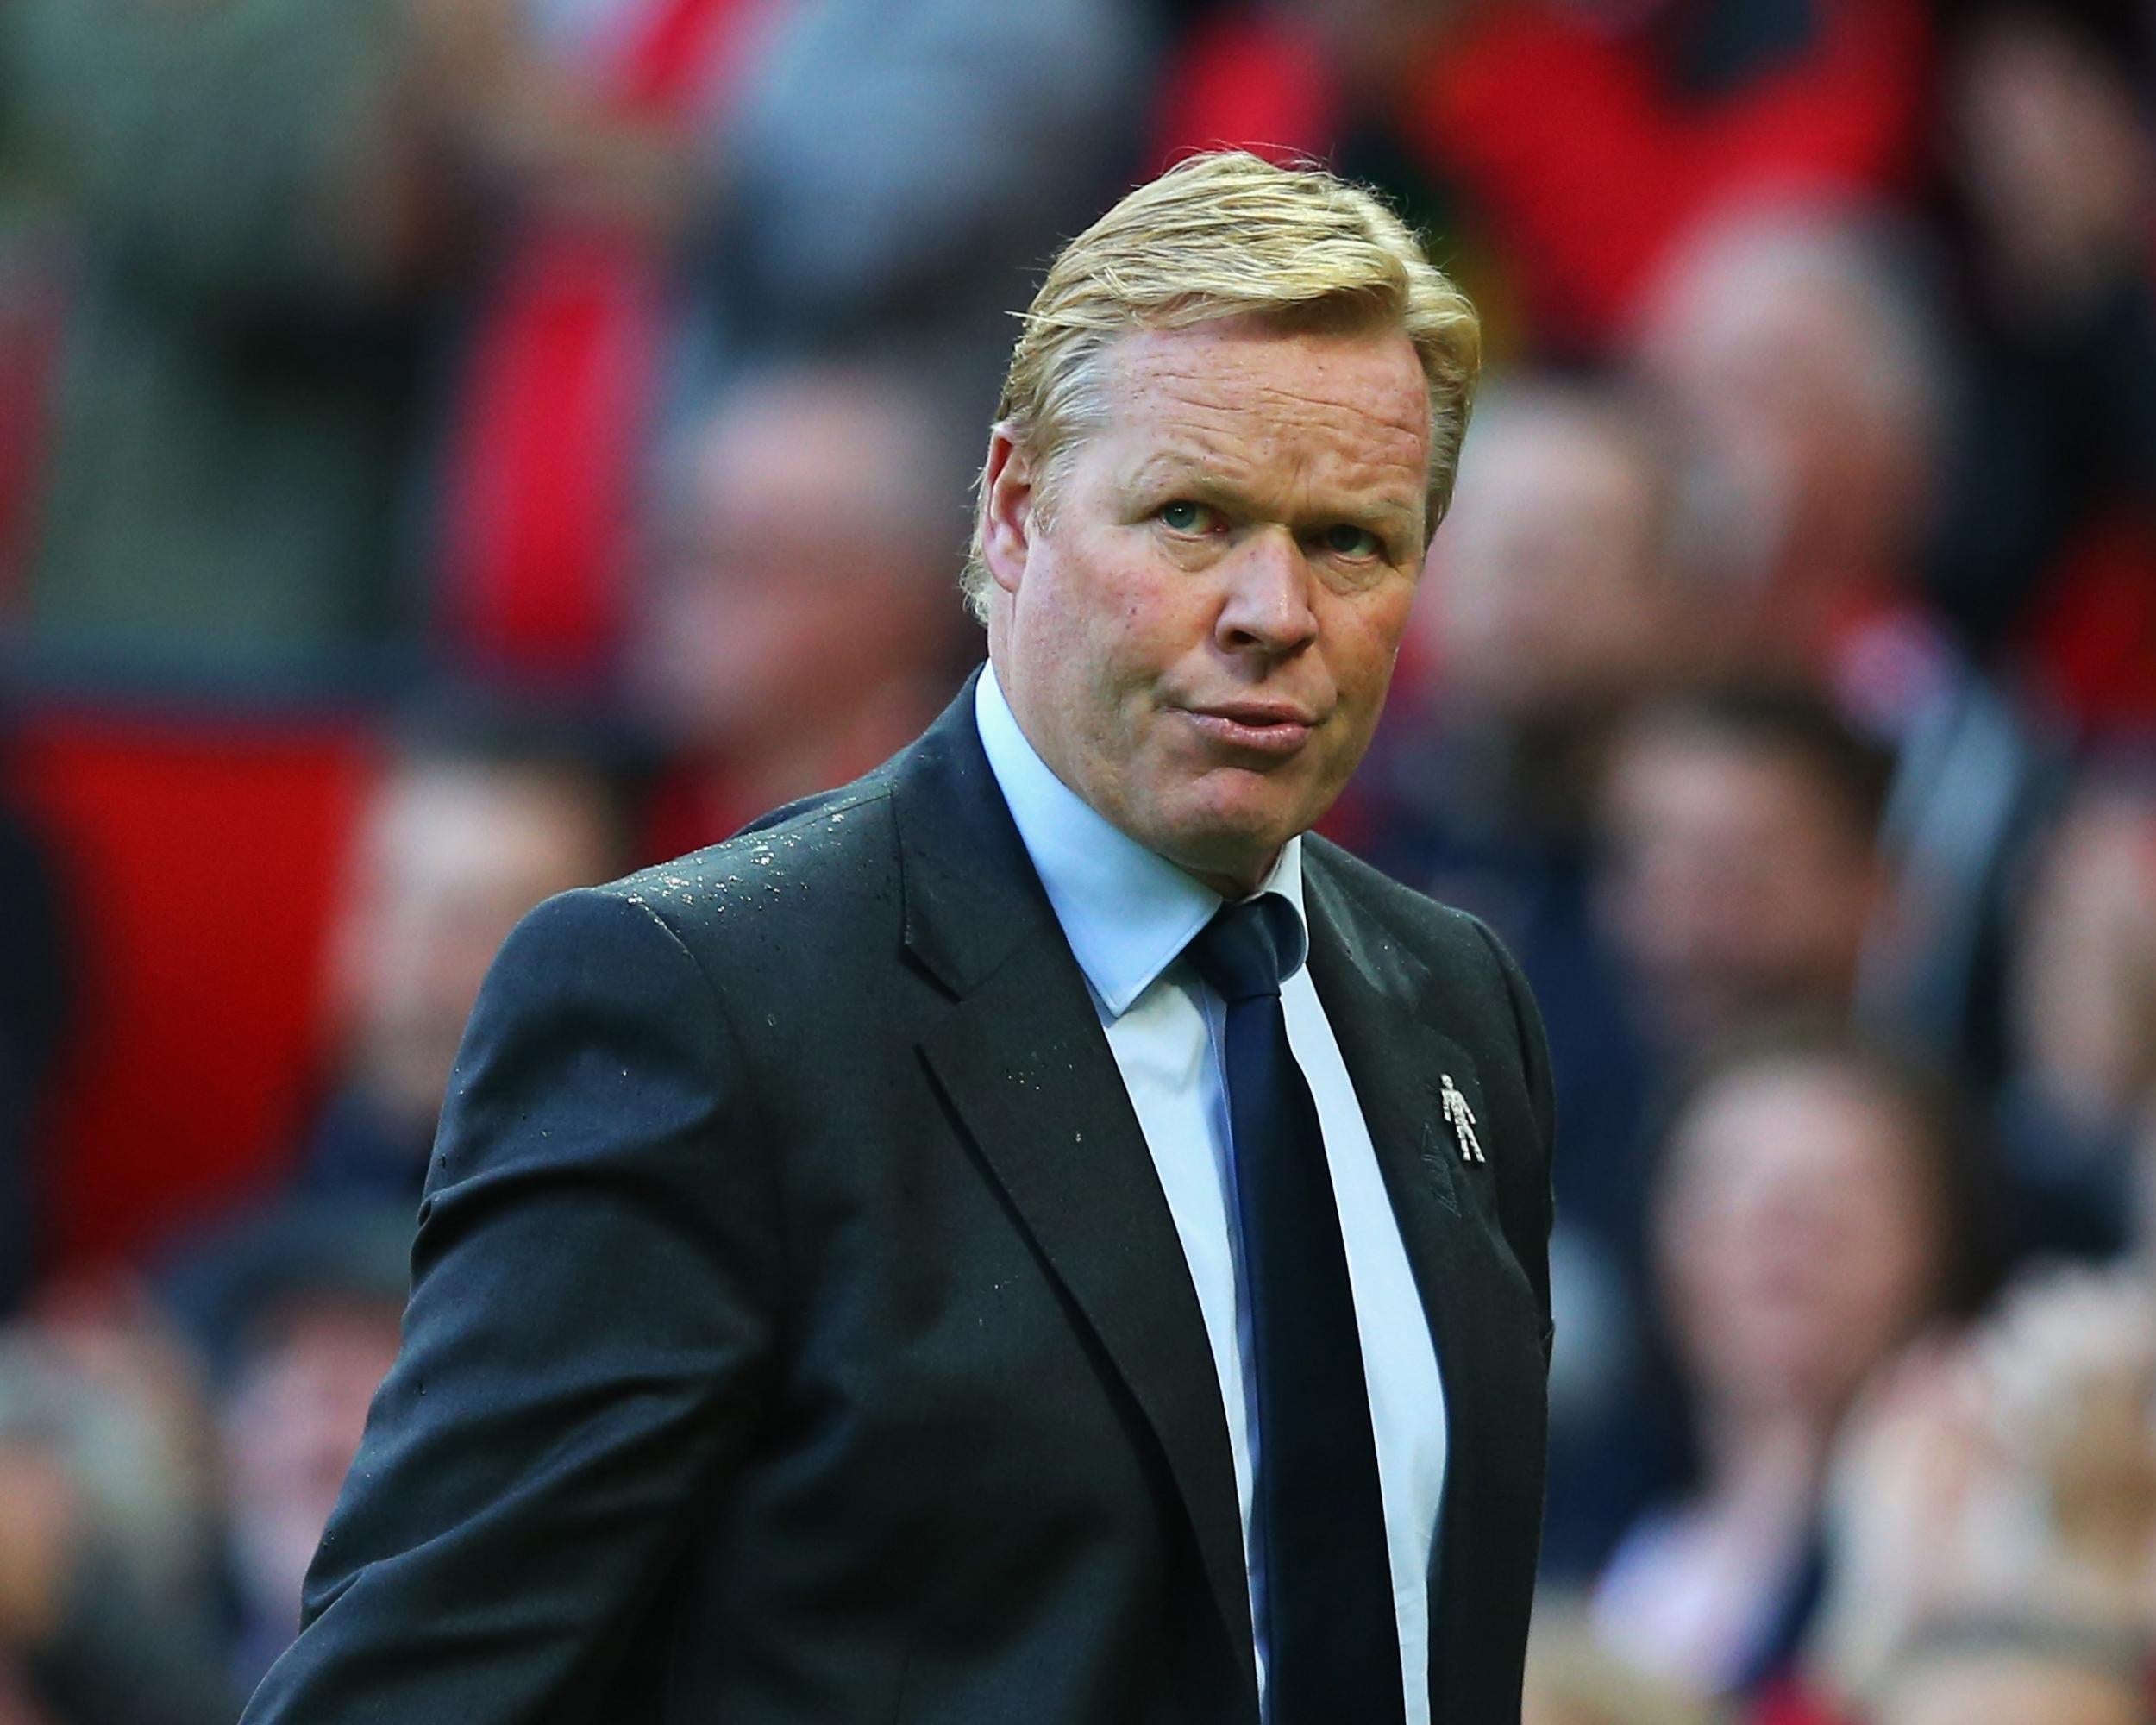 Koeman spent £140m in the summer with Everton